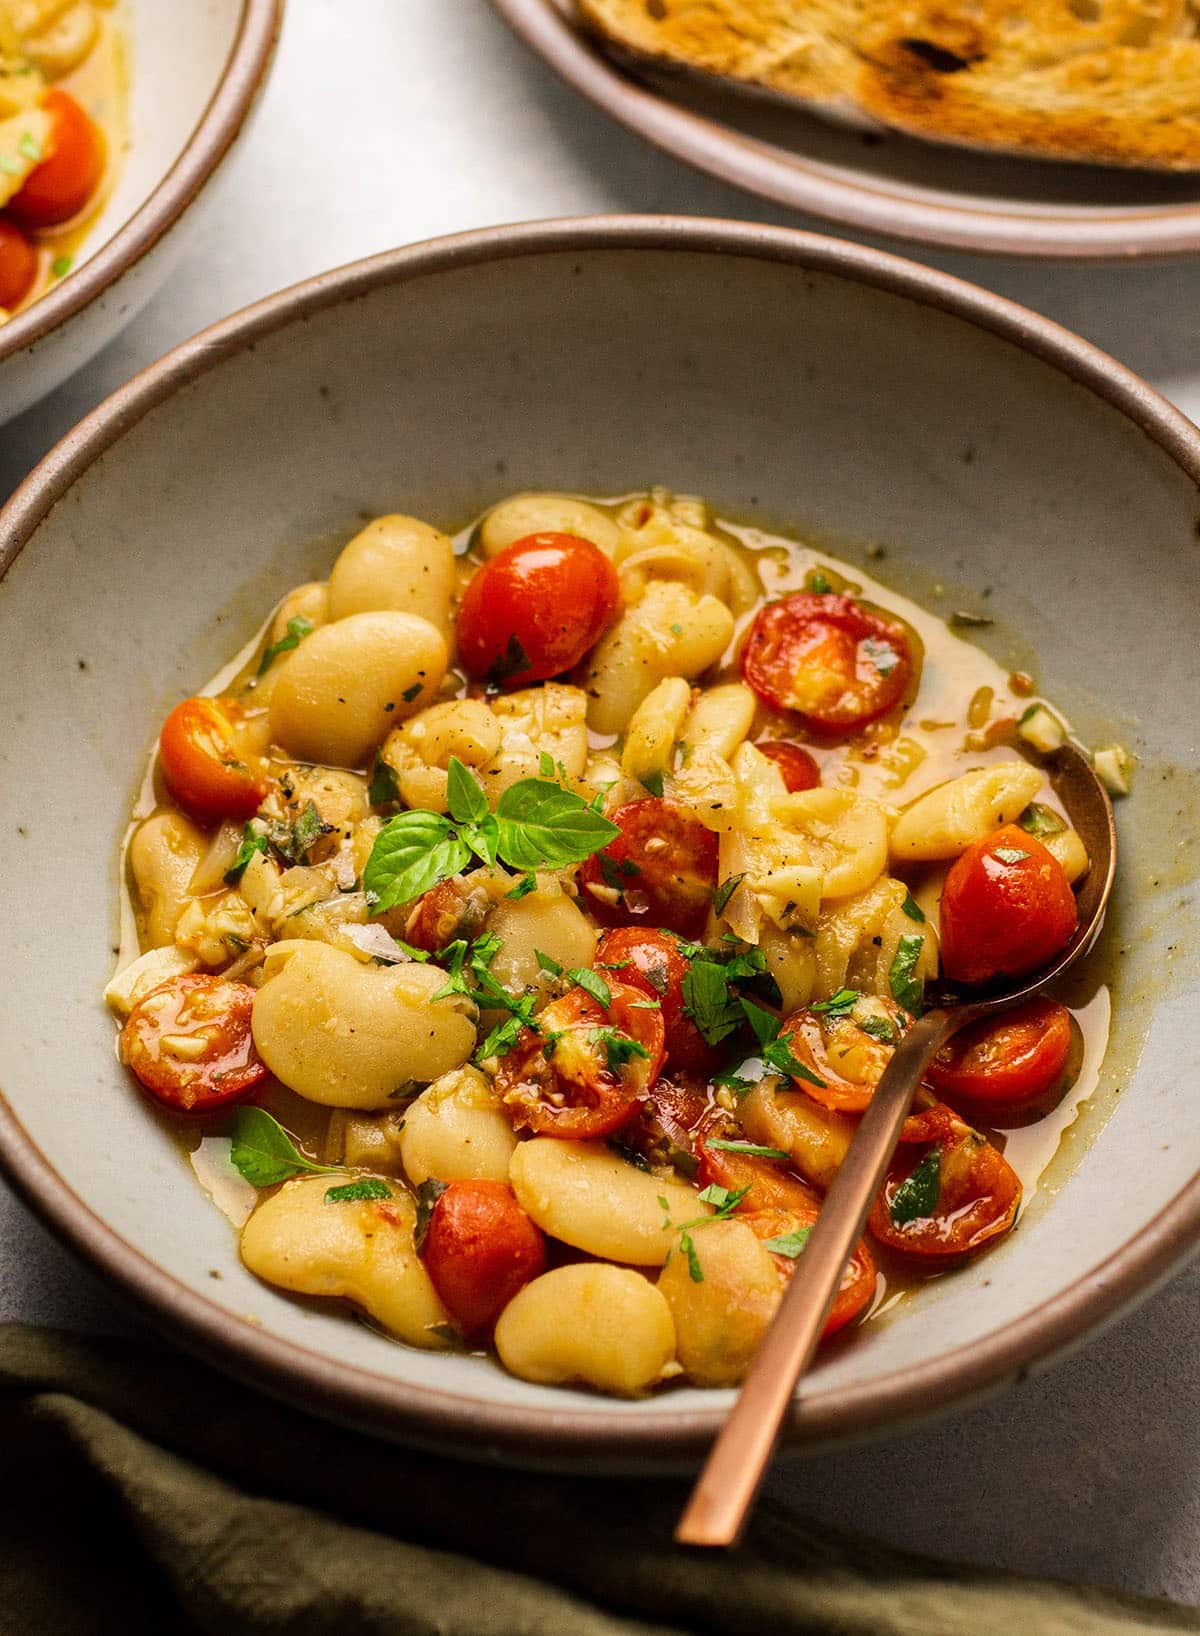 Butter beans with broth and tomatoes.